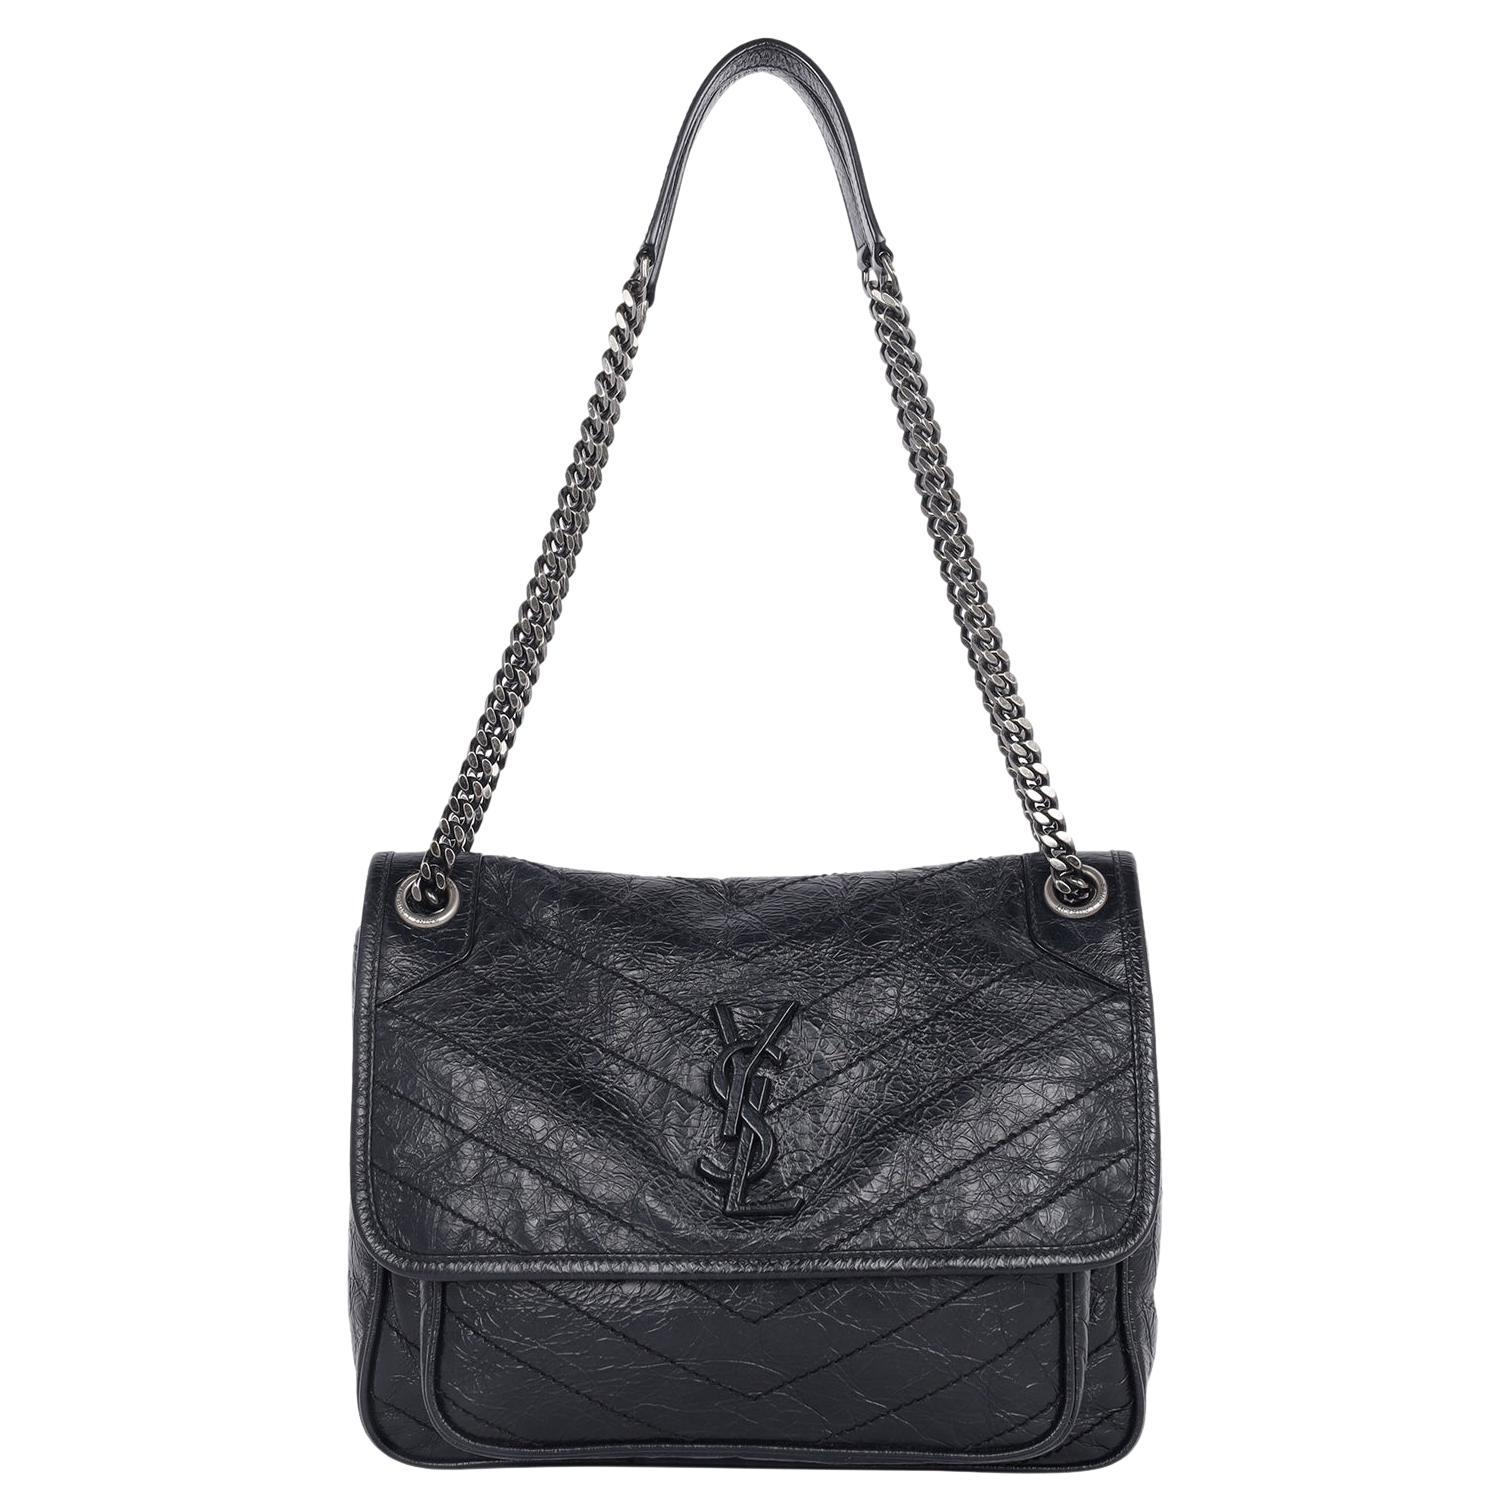 Authentic Preowned Crinkled Calfskin Leather Monogram Black Medium Niki Chain Satchel.

This elegant shoulder bag features crinkled distressed, chevron-quilted calfskin leather in black, front flap magnetic snap closure with YSL logo, rear slip